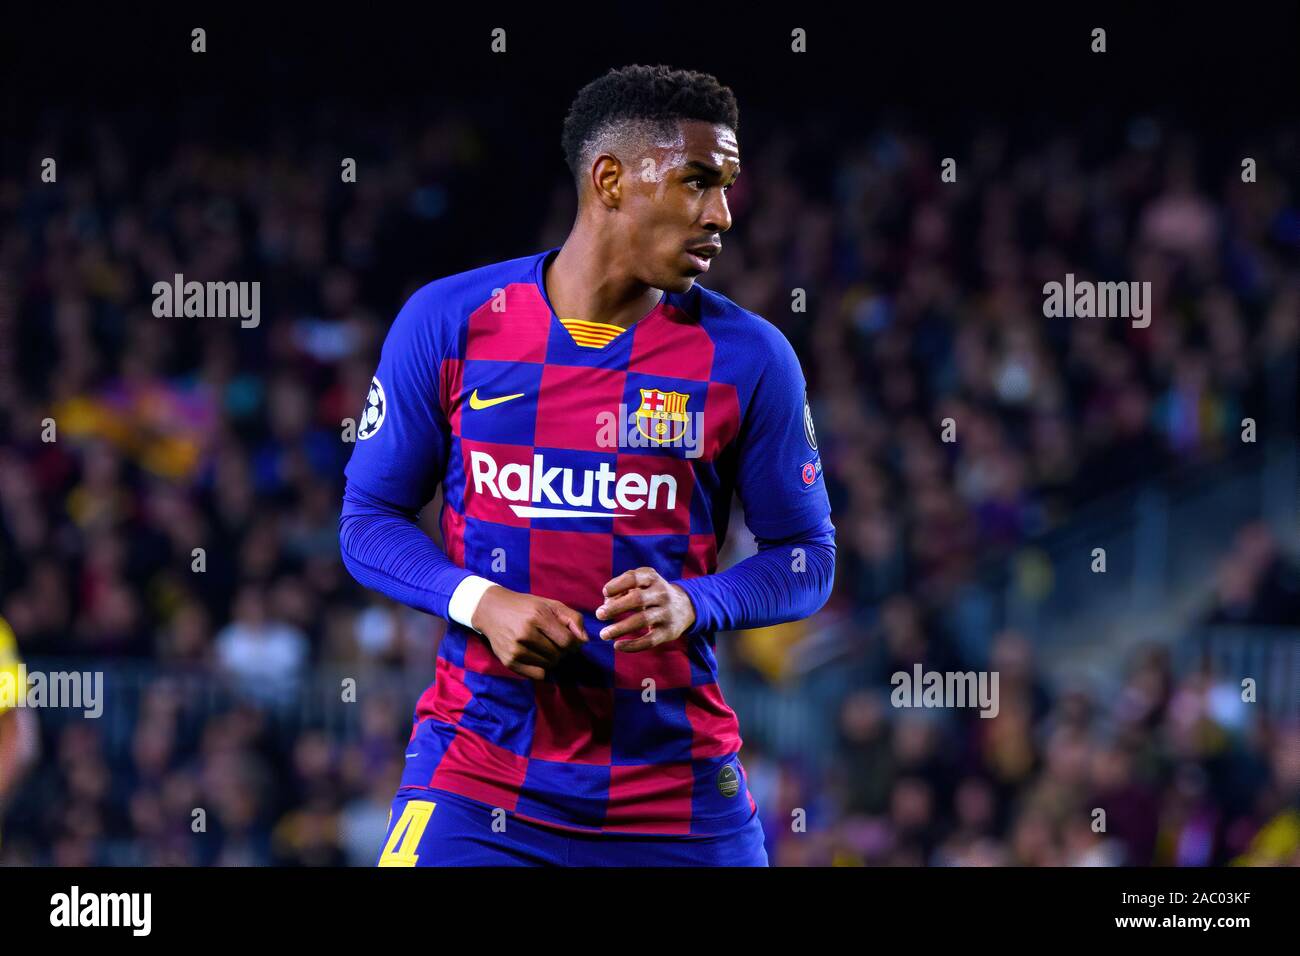 BARCELONA - NOV 27: Junior Firpo plays at the Champions League match between FC Barcelona and Borussia Dortmund at the Camp Nou Stadium on November 27 Stock Photo